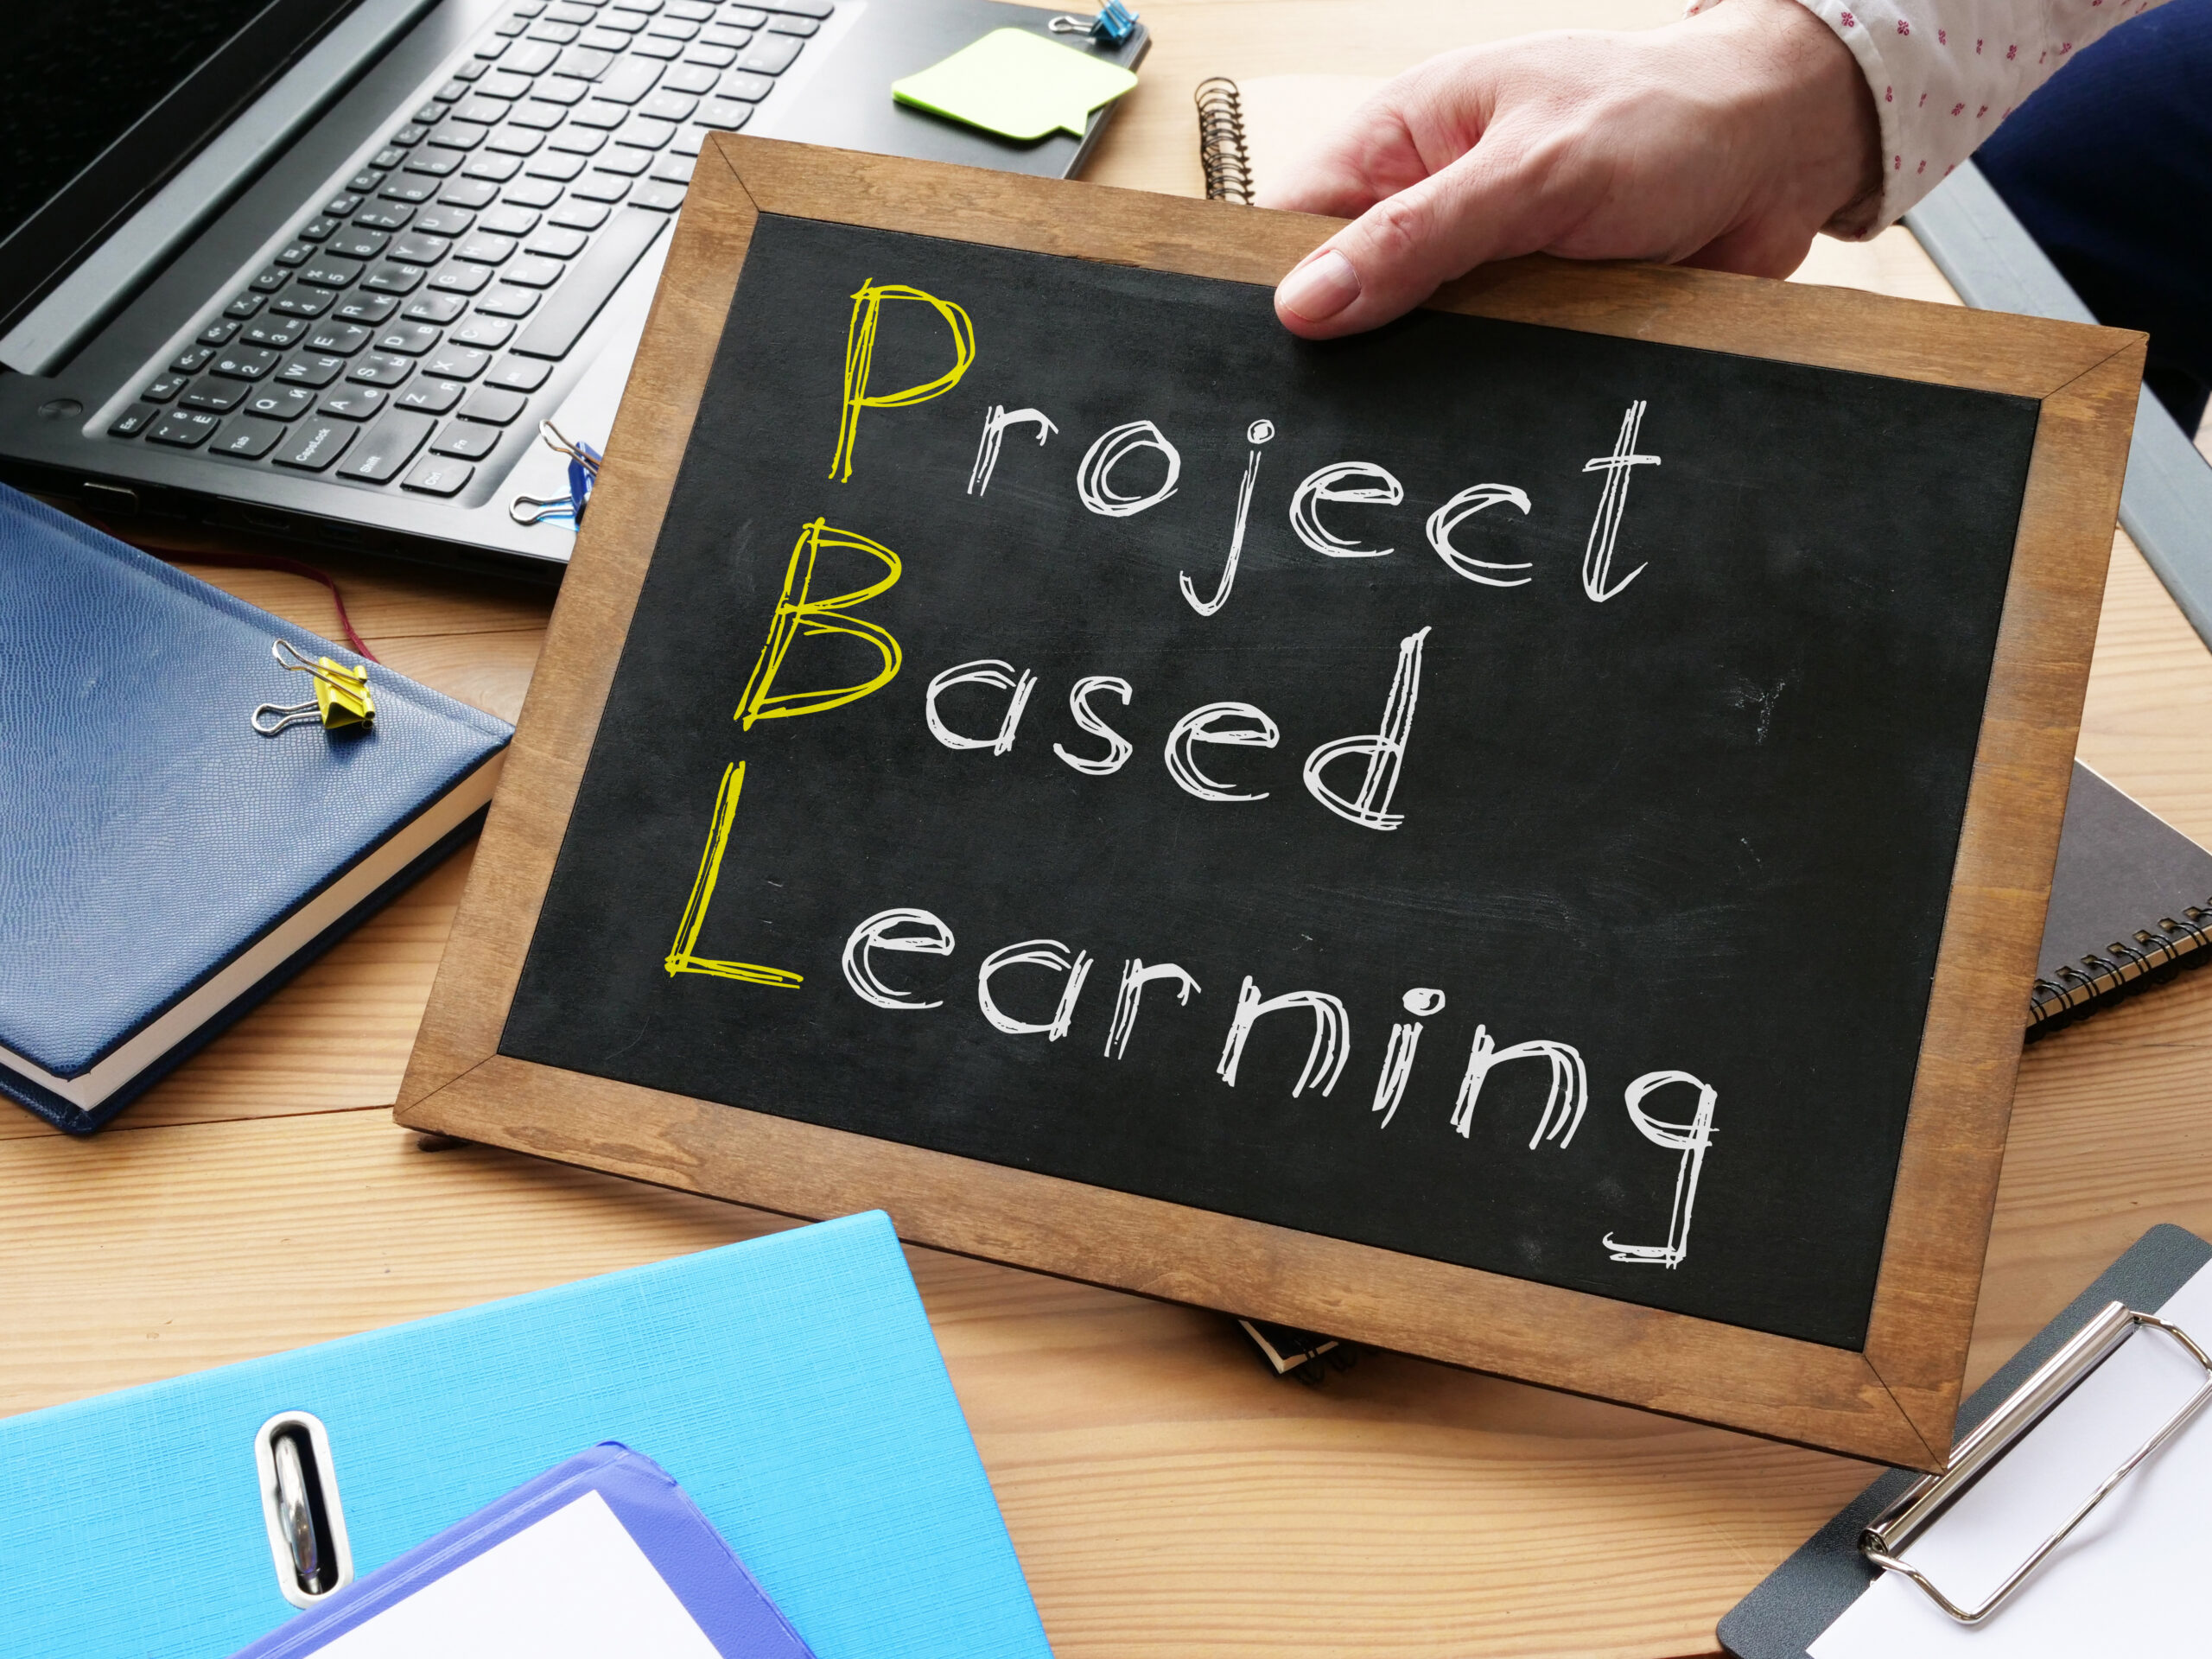 Project-Based Learning Improves Student Performance According to Researchers in Five Universities